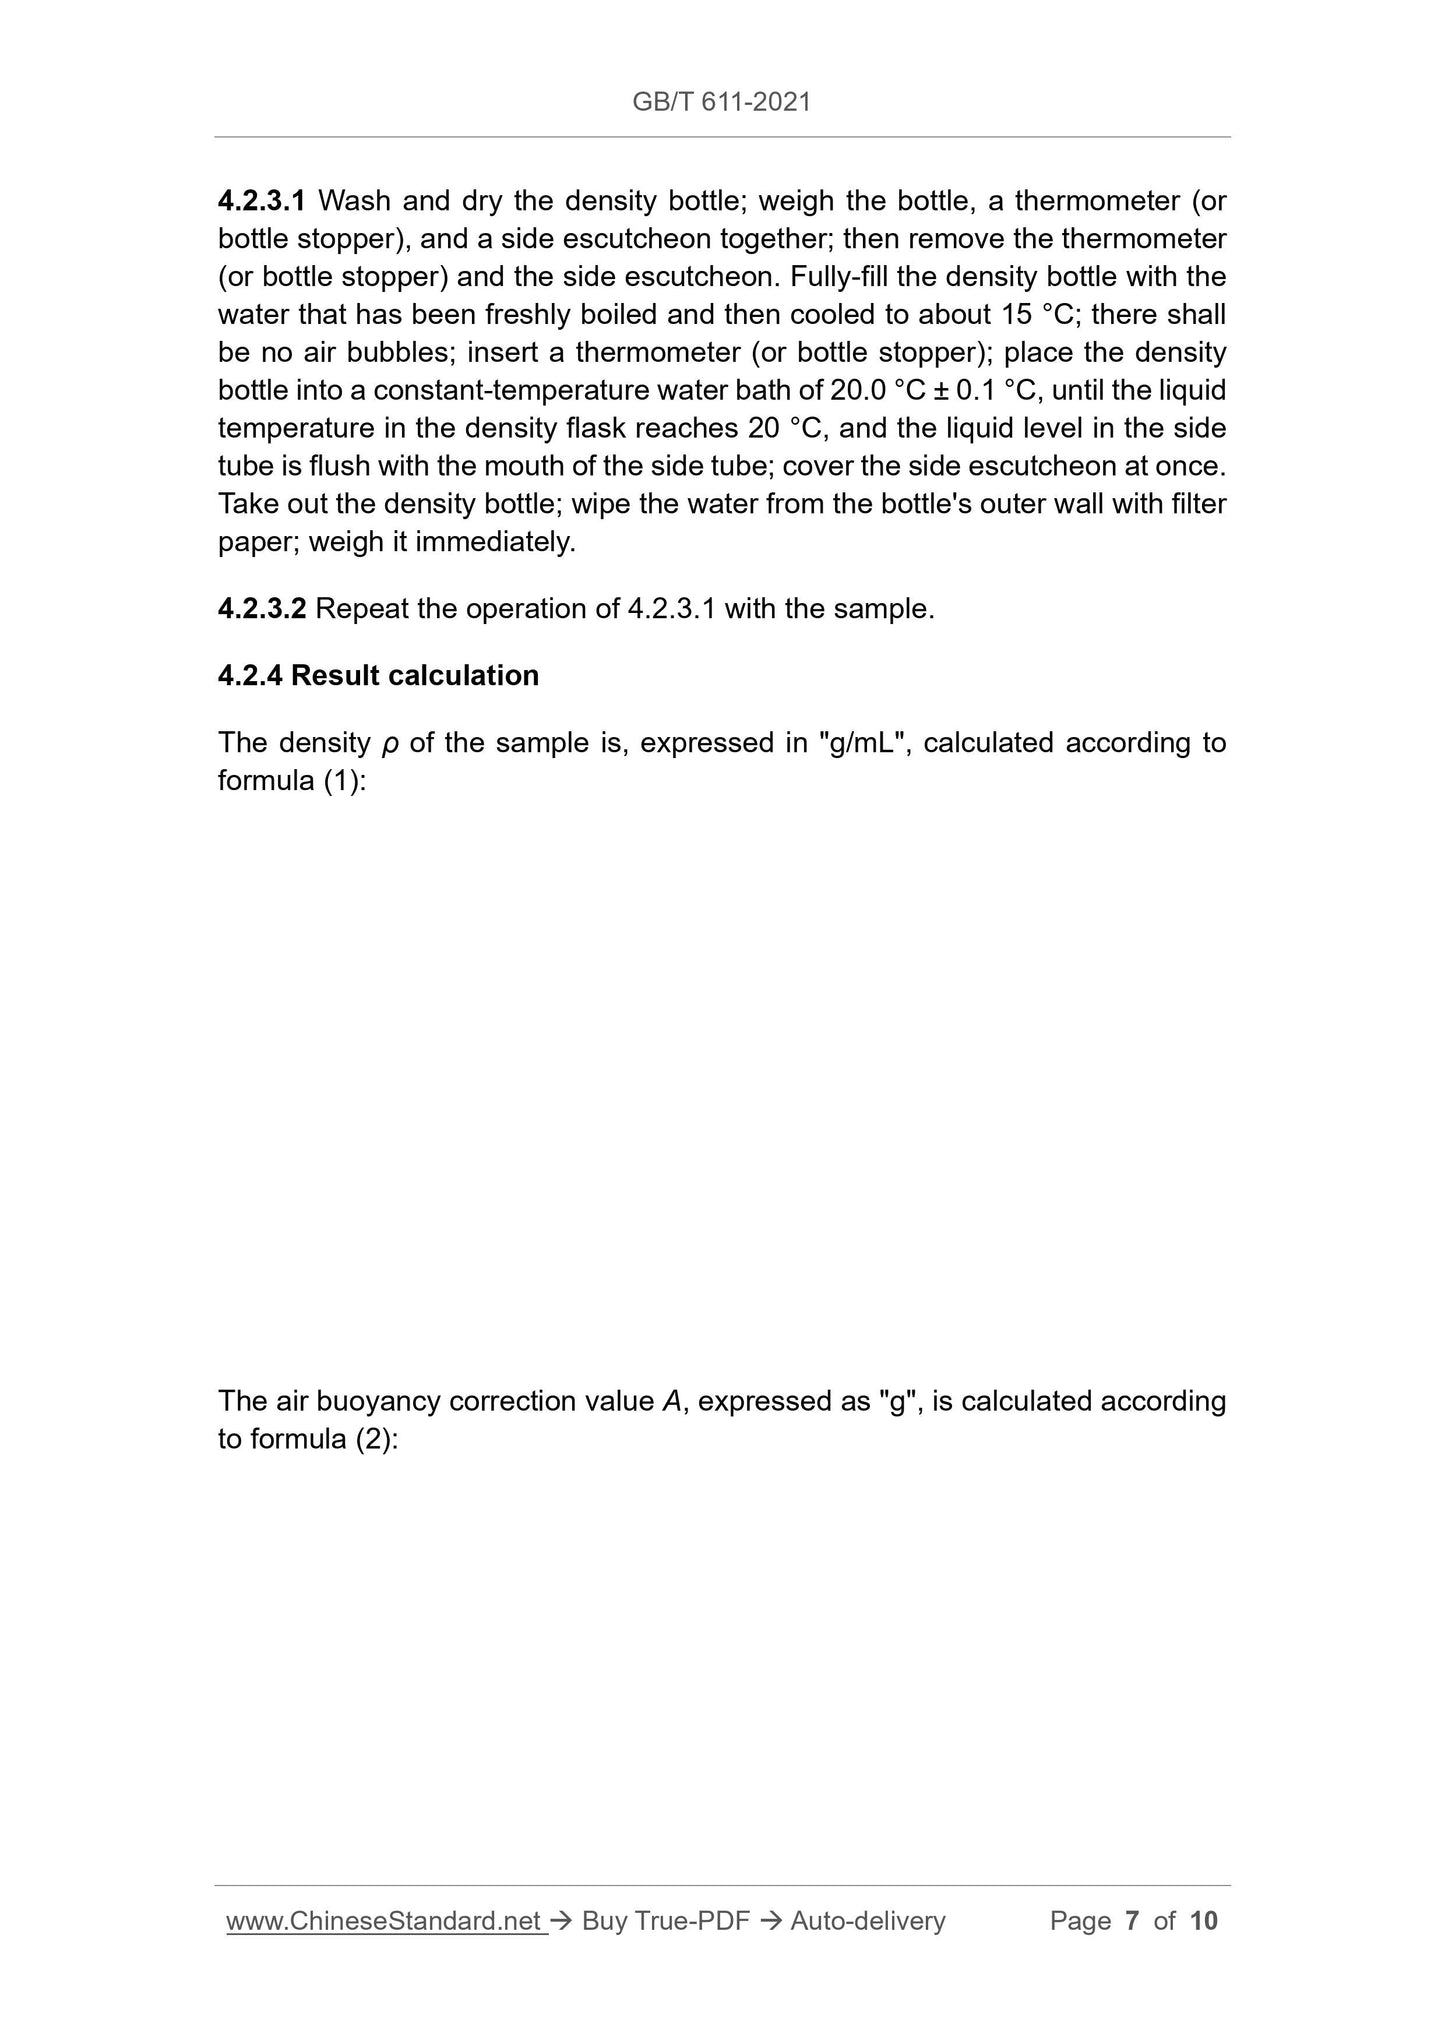 GB/T 611-2021 Page 4